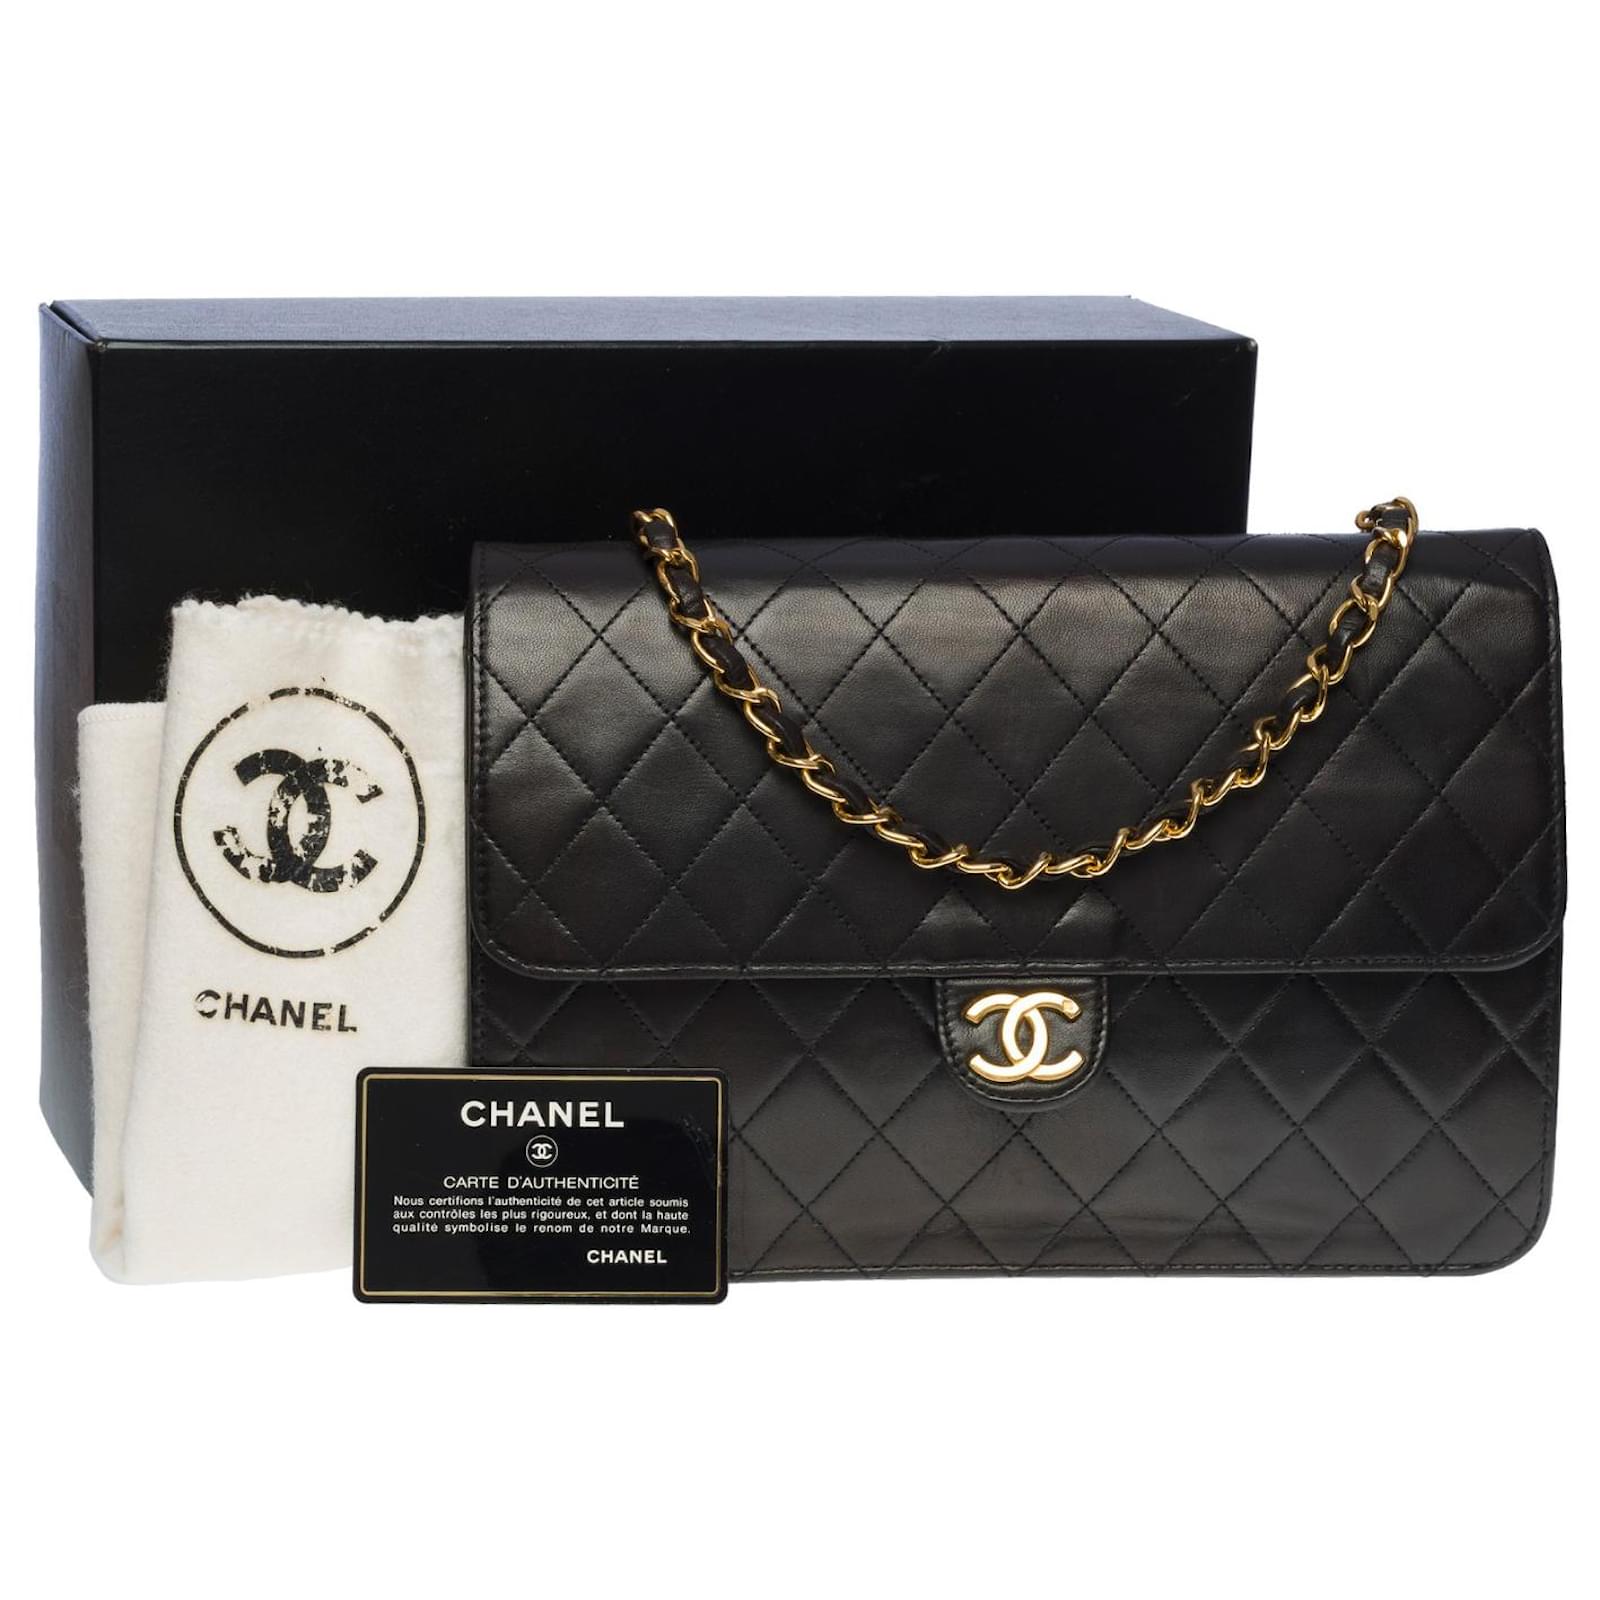 Chanel Bags Are Best Investments Against Inflation Says One Report